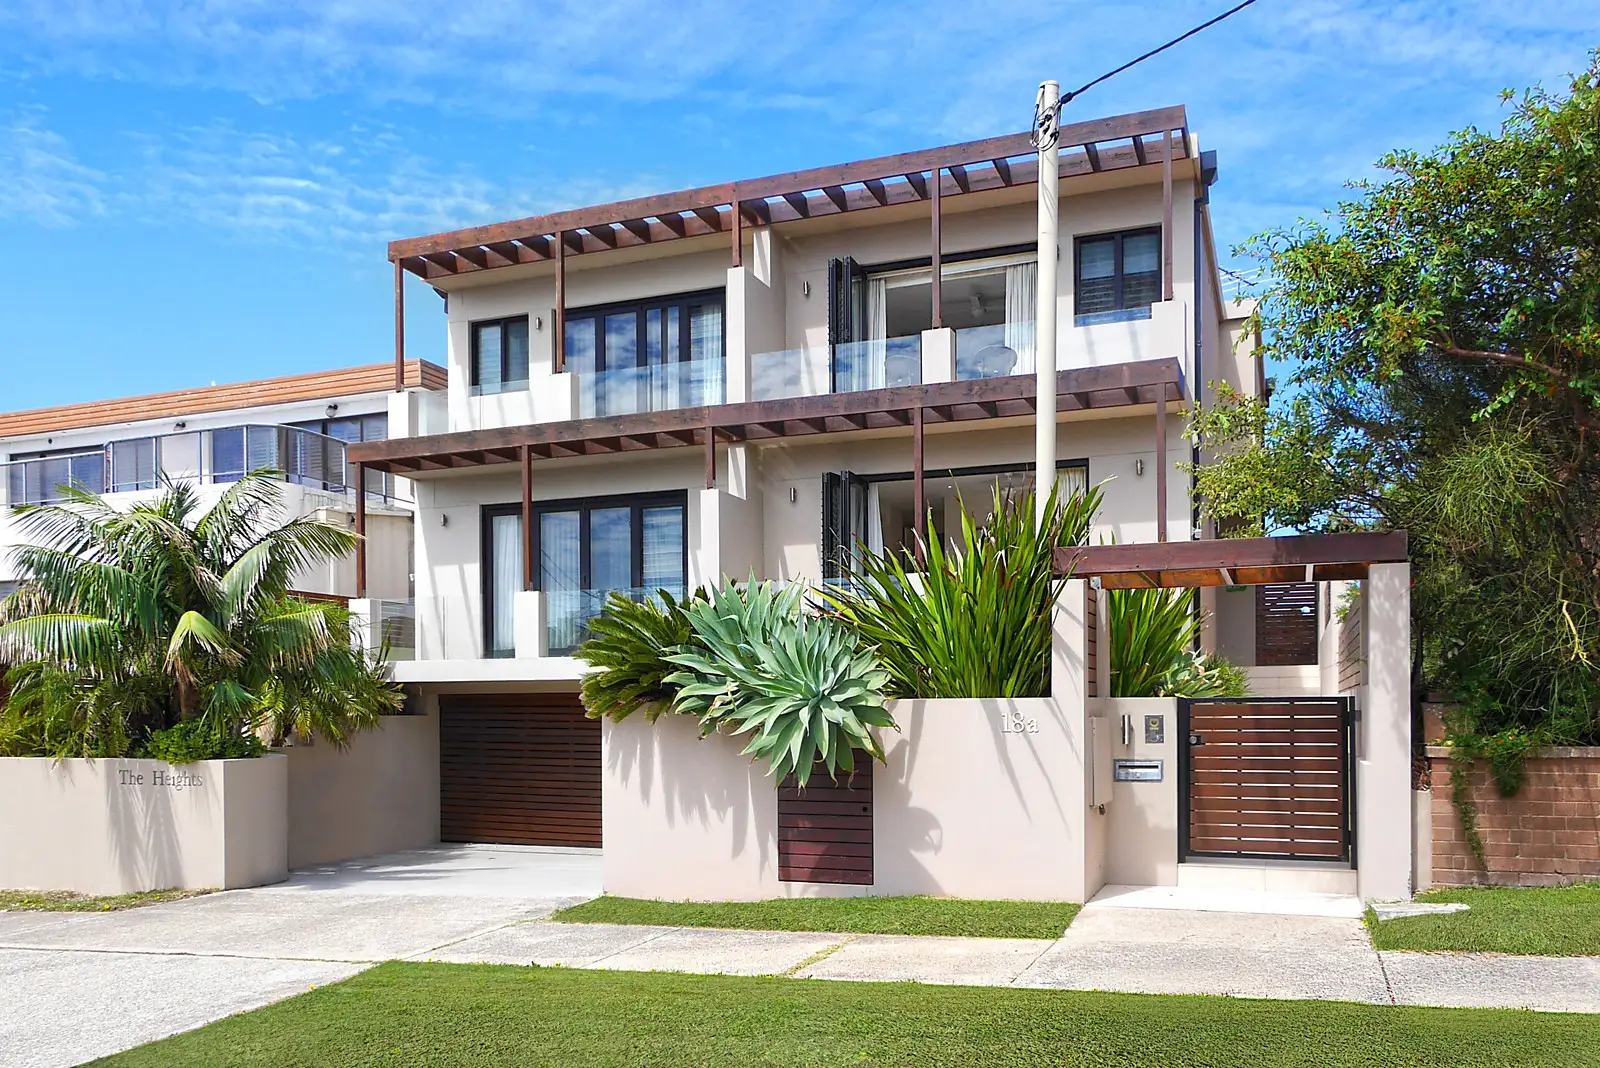 Photo #1: 18a Napier Street, Dover Heights - Sold by Sydney Sotheby's International Realty